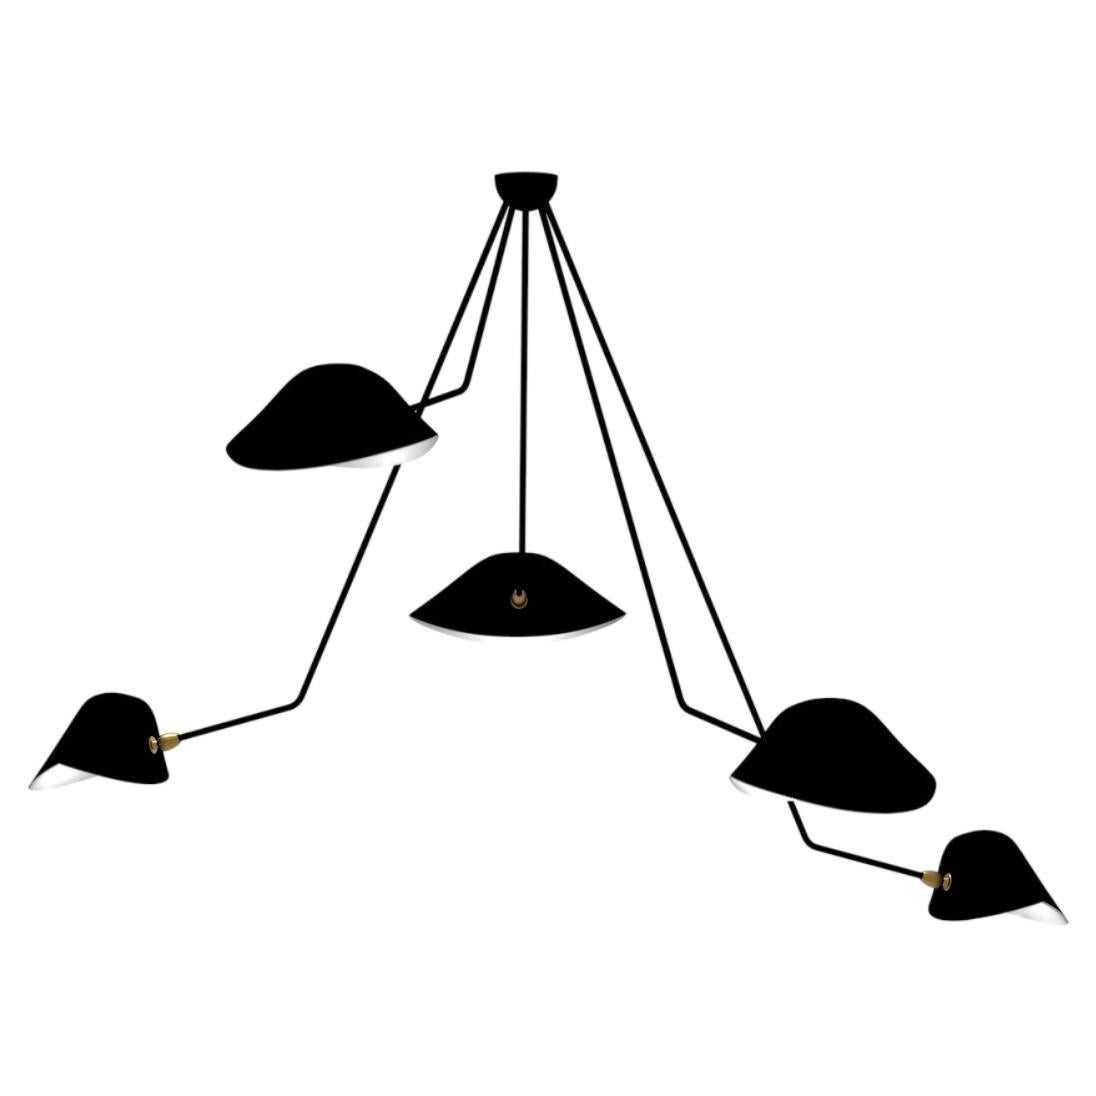 Serge Mouille - Spider Ceiling Lamp 5 Falling Arms in Black 47" Drop - IN STOCK!